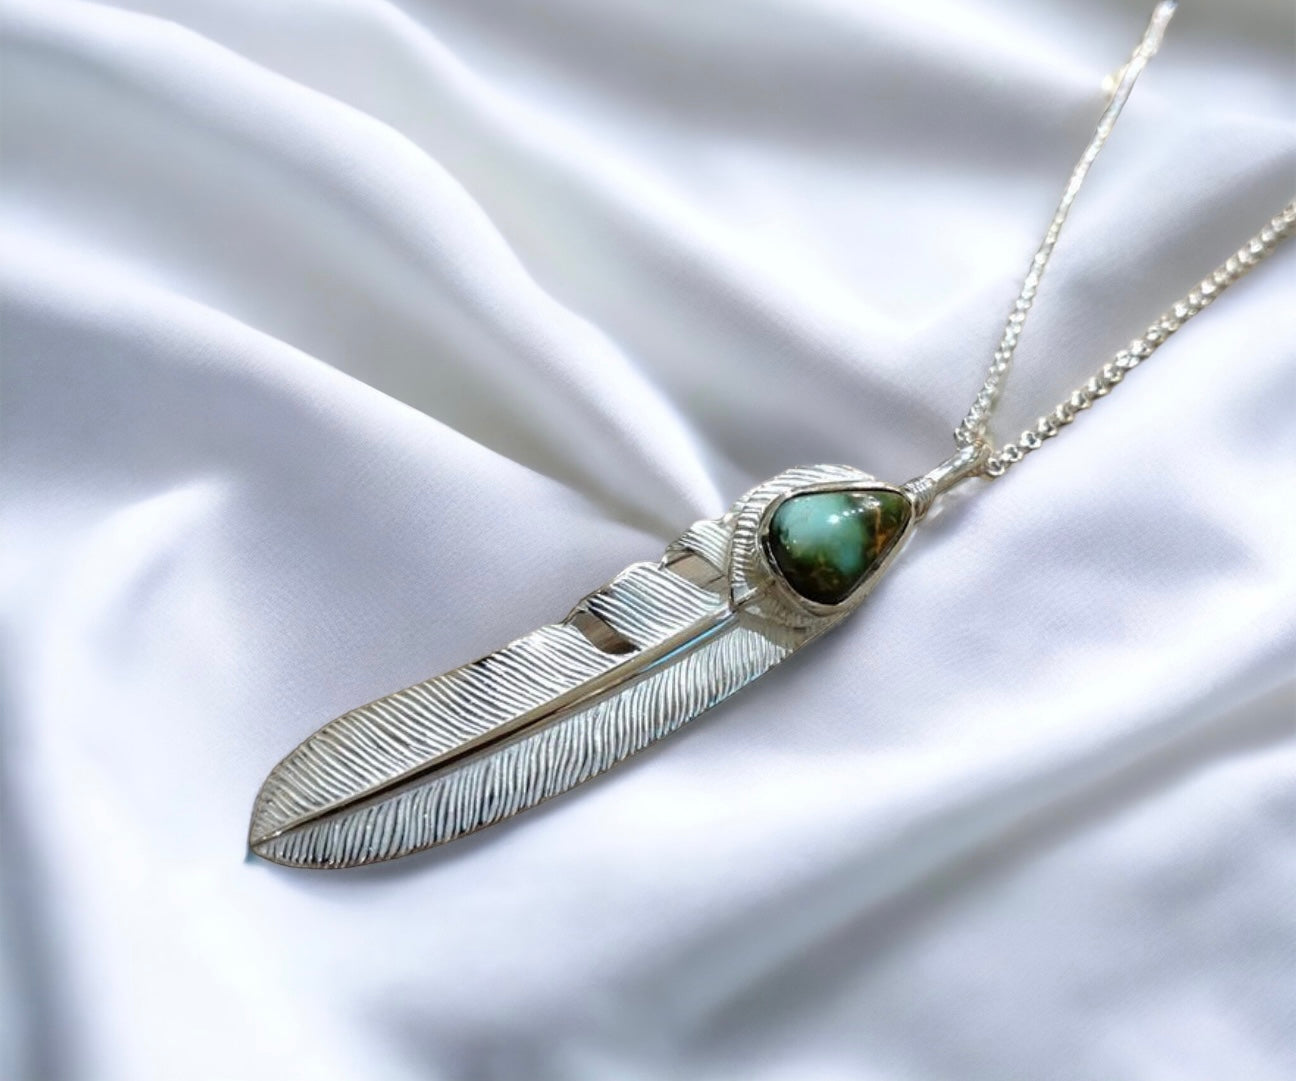 Silver Dollar Craft Top Silver Feather Pendant w/ Royston Turquoise